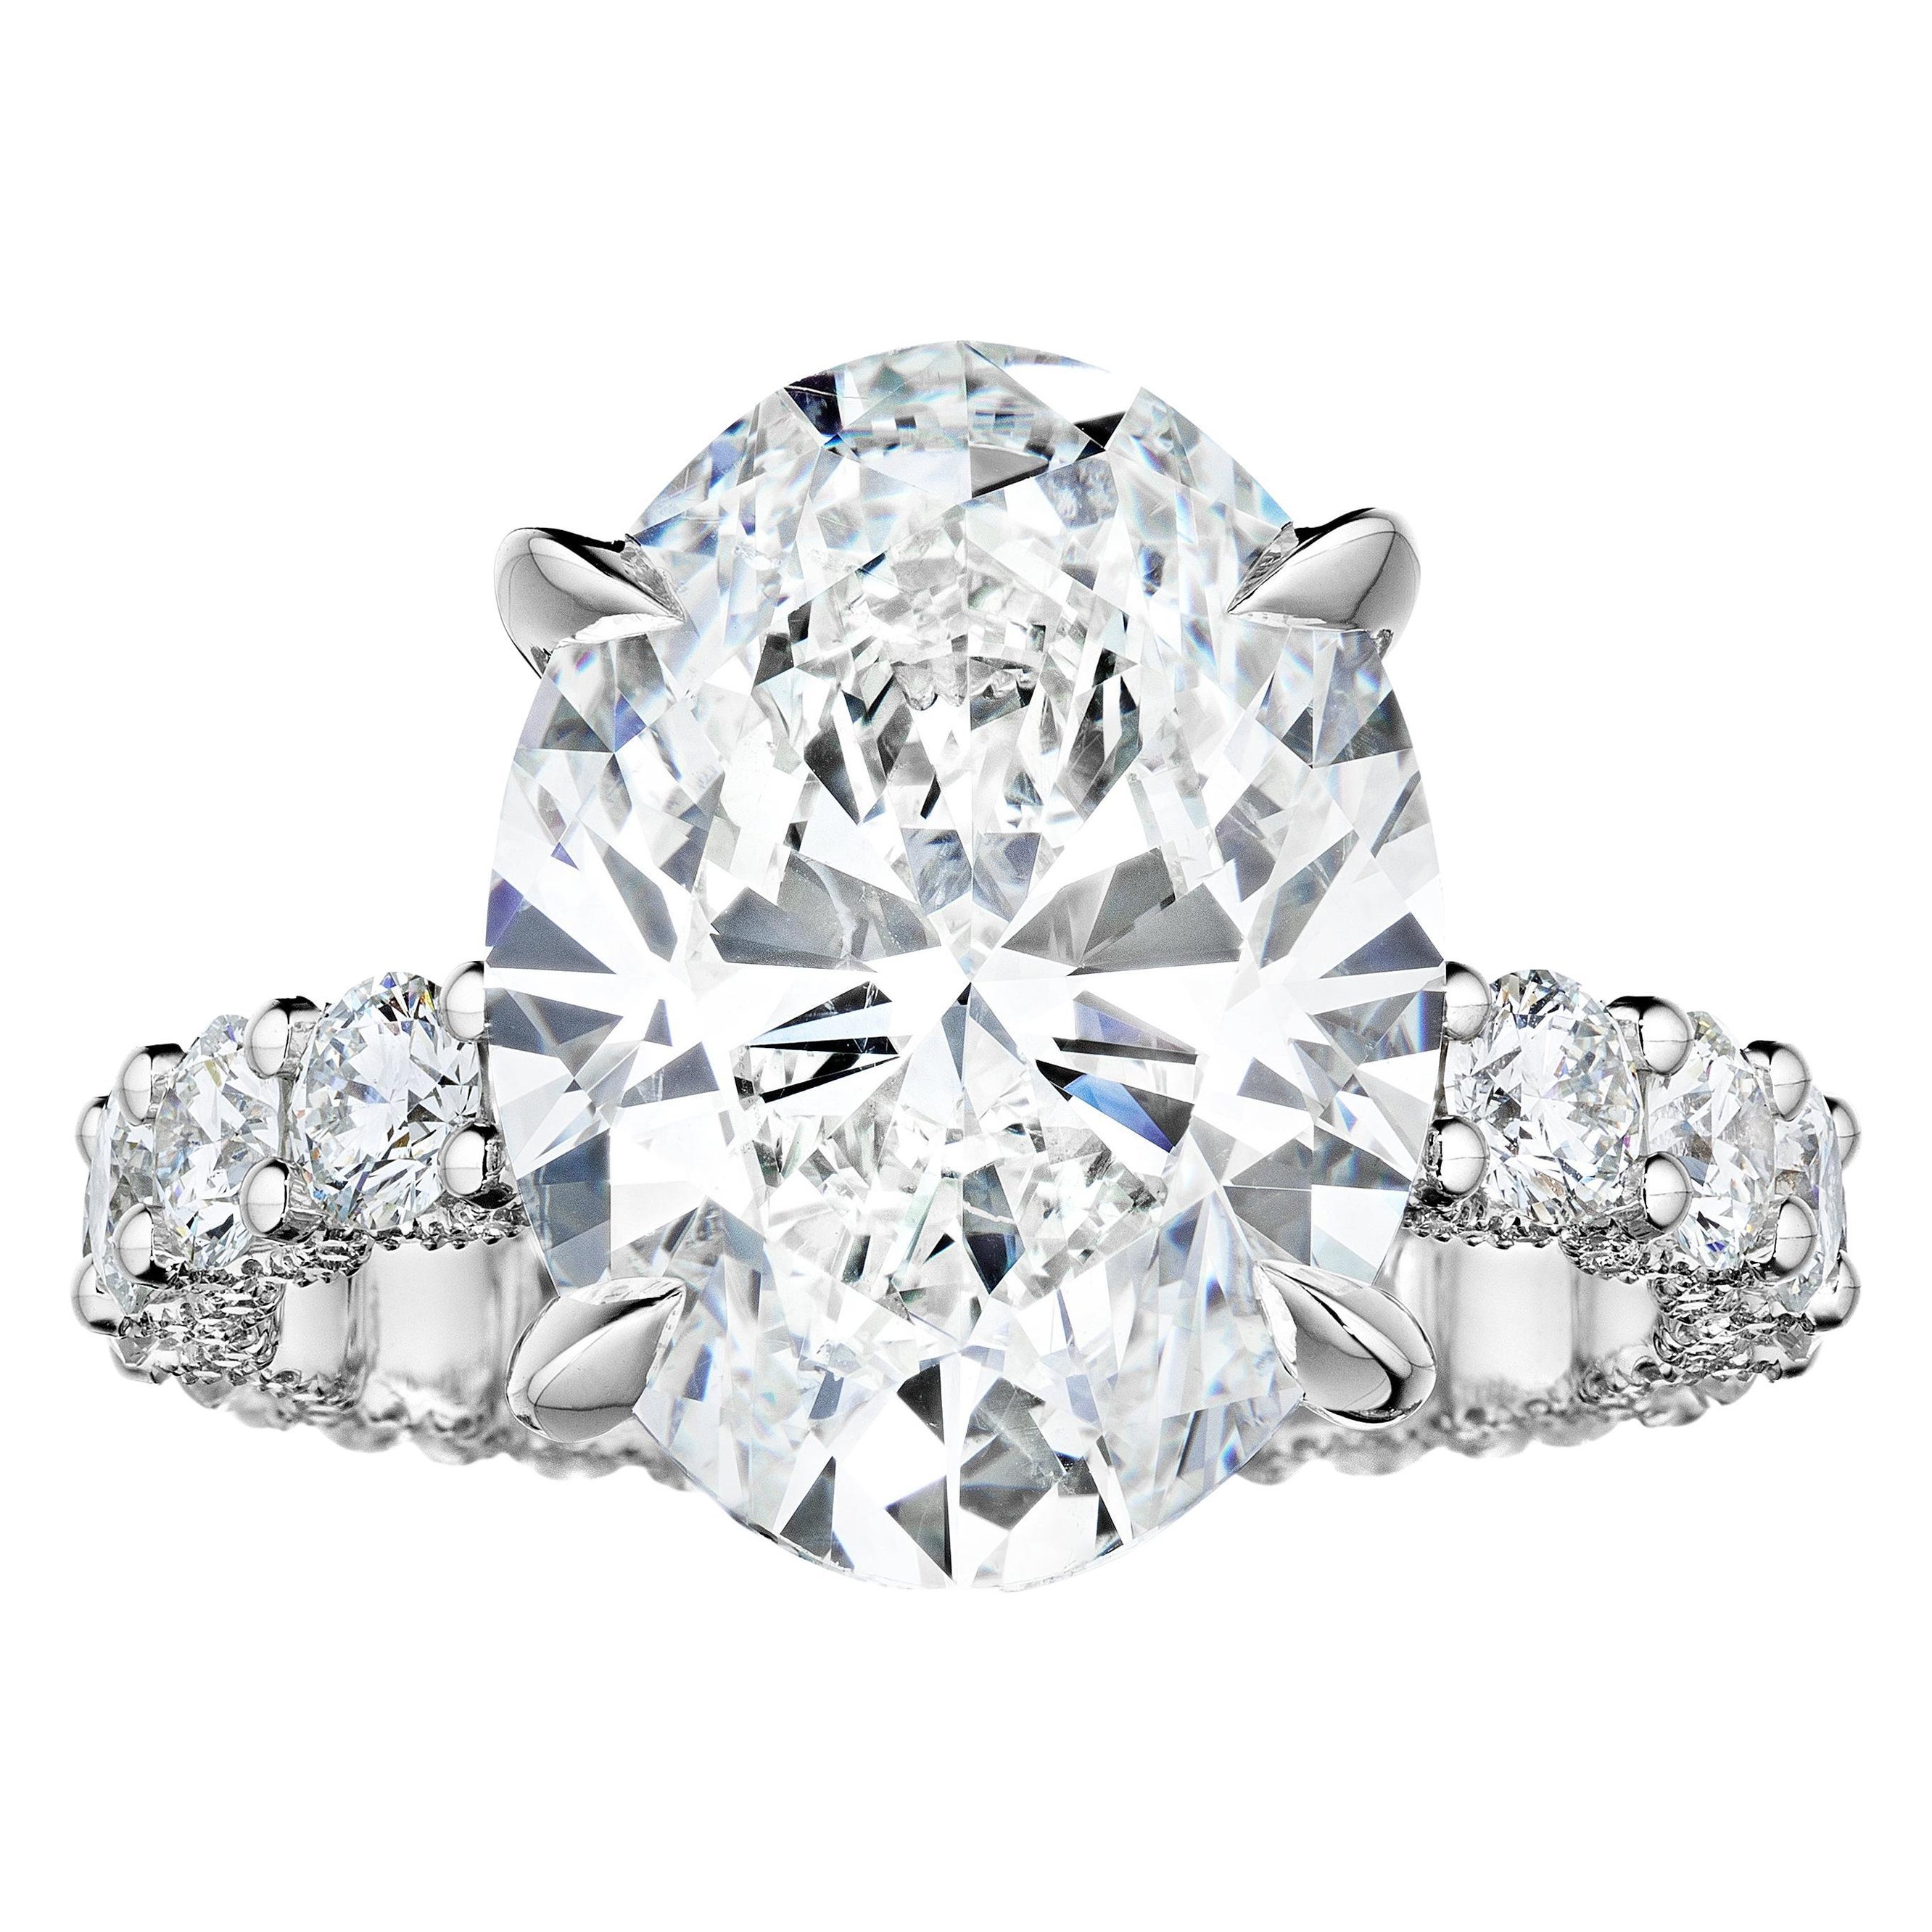 For Sale:  GIA Certified 5.00 Carat D VS1 GIA Oval Diamond Engagement Ring "Catherine"